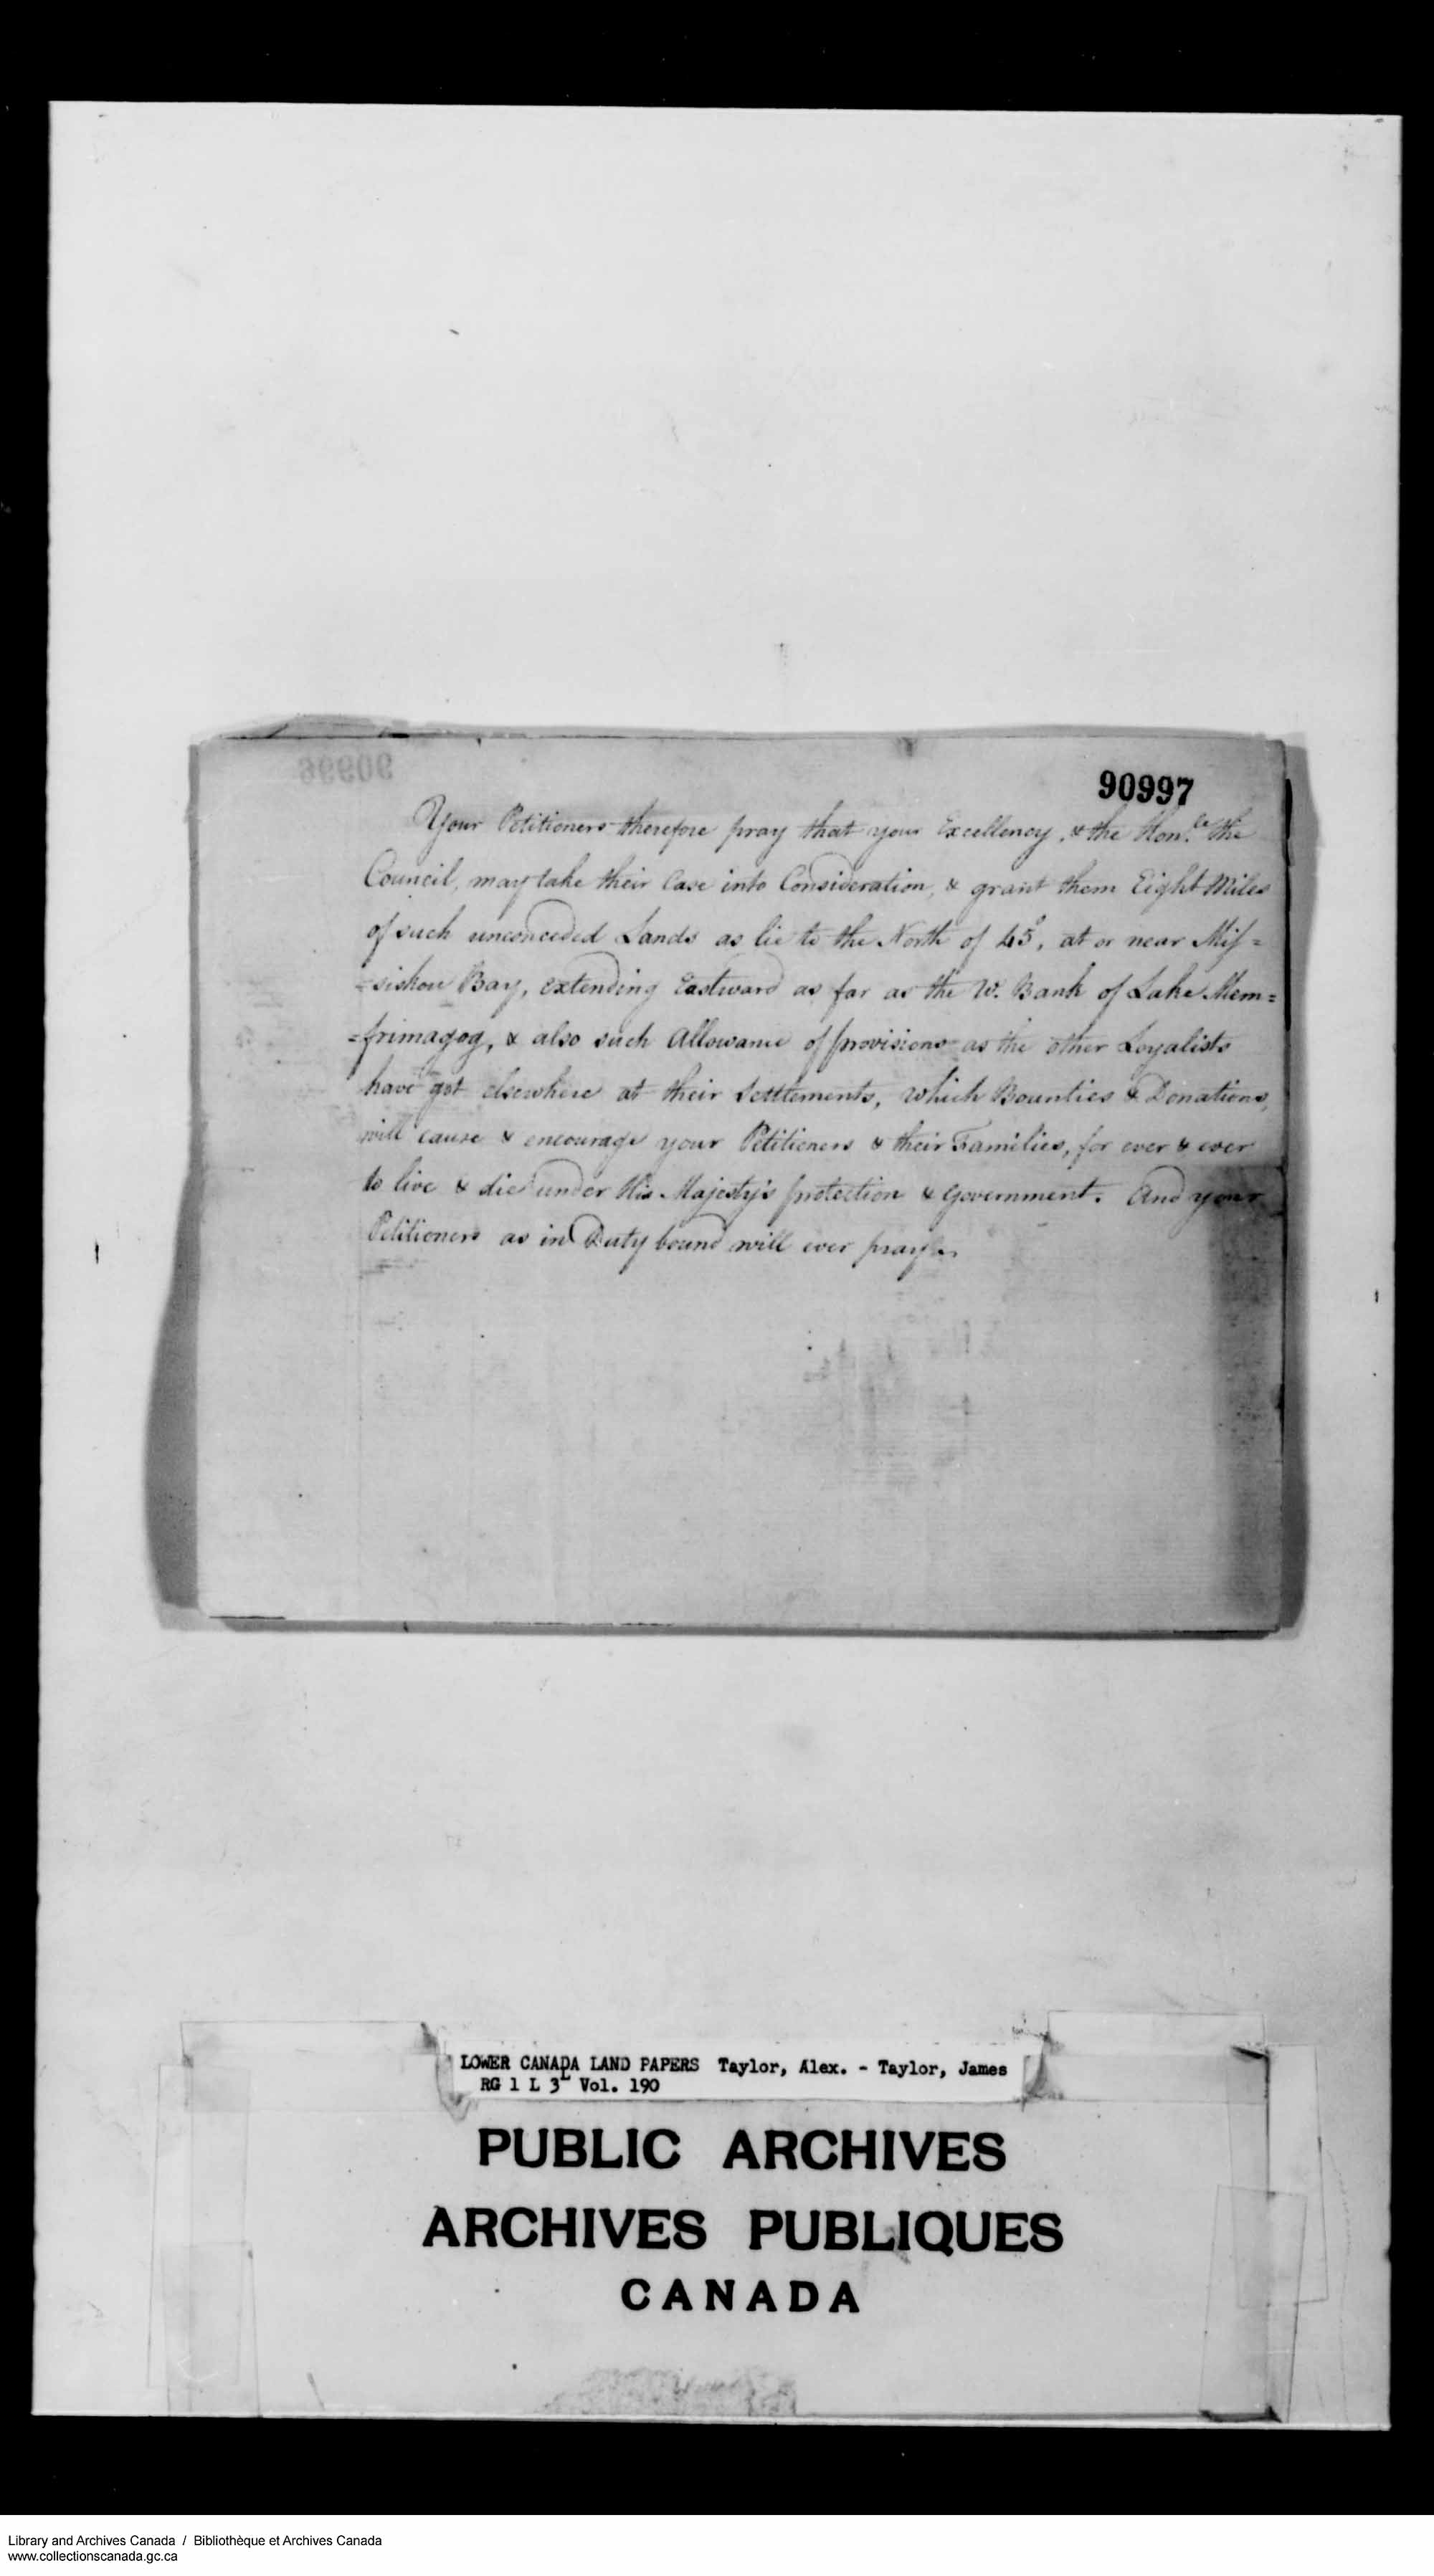 Digitized page of  for Image No.: e008738181